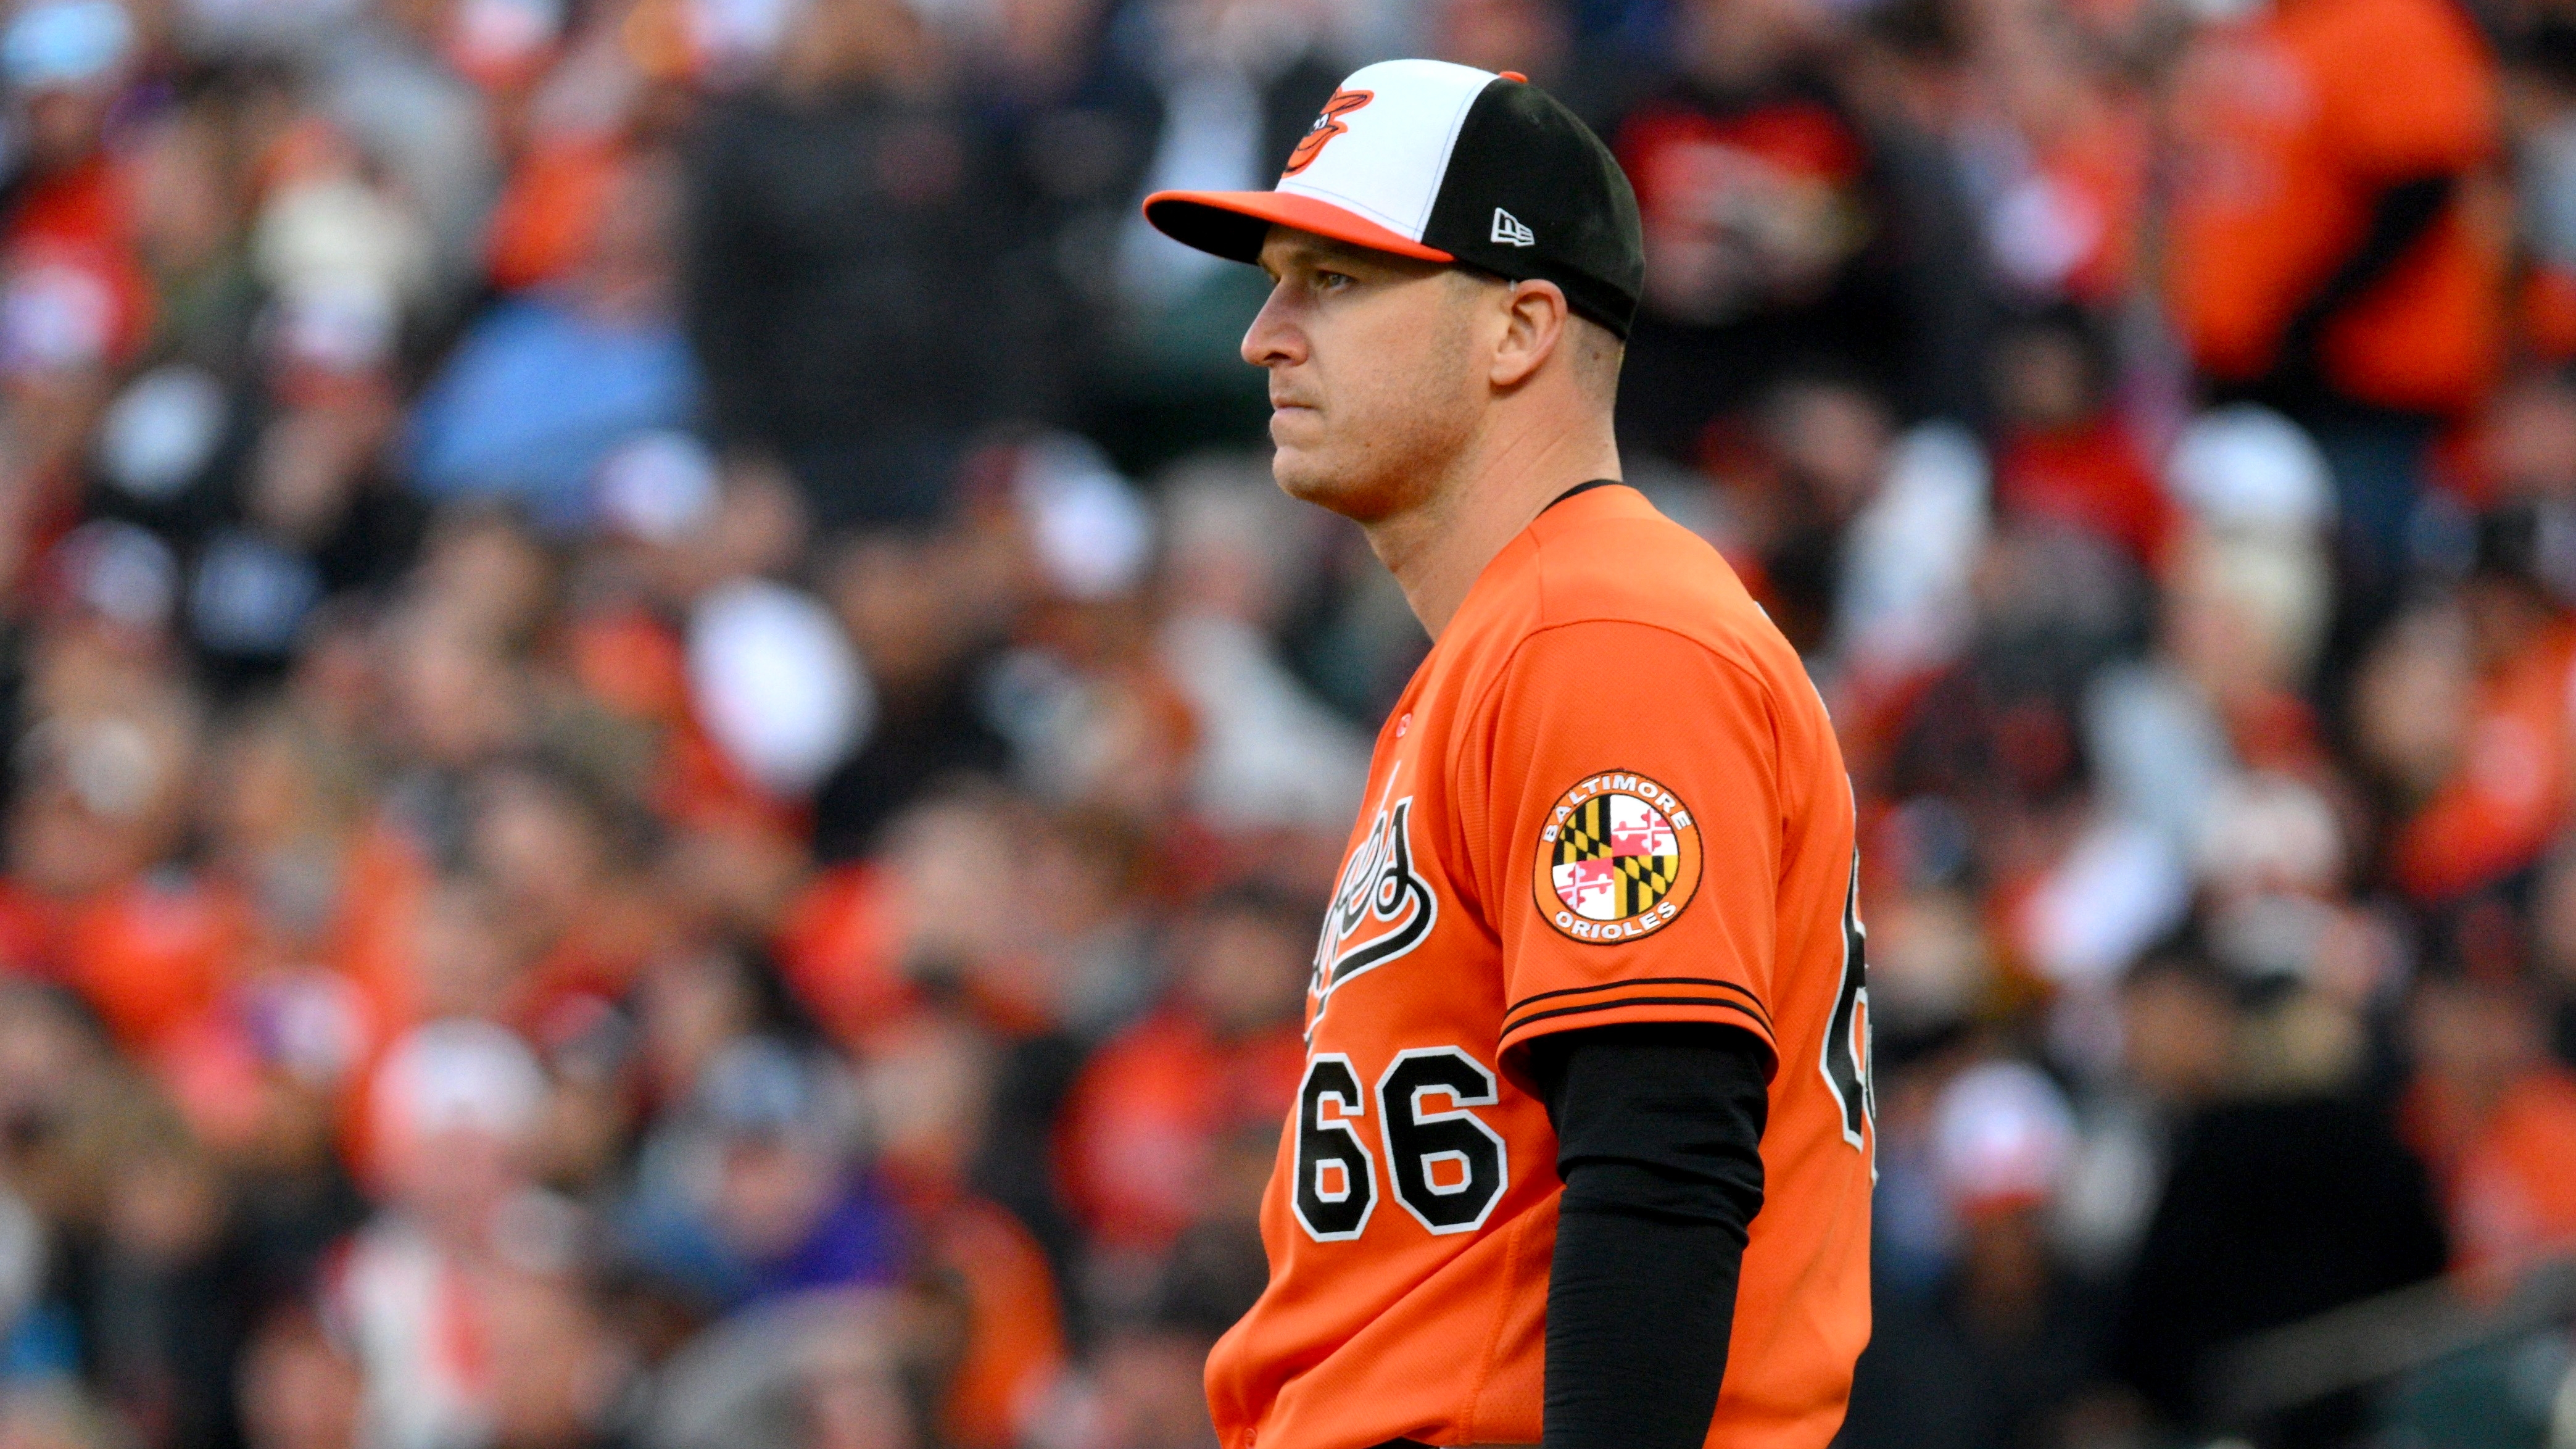 Orioles' lack of signature pitching additions exposed in ALDS Game